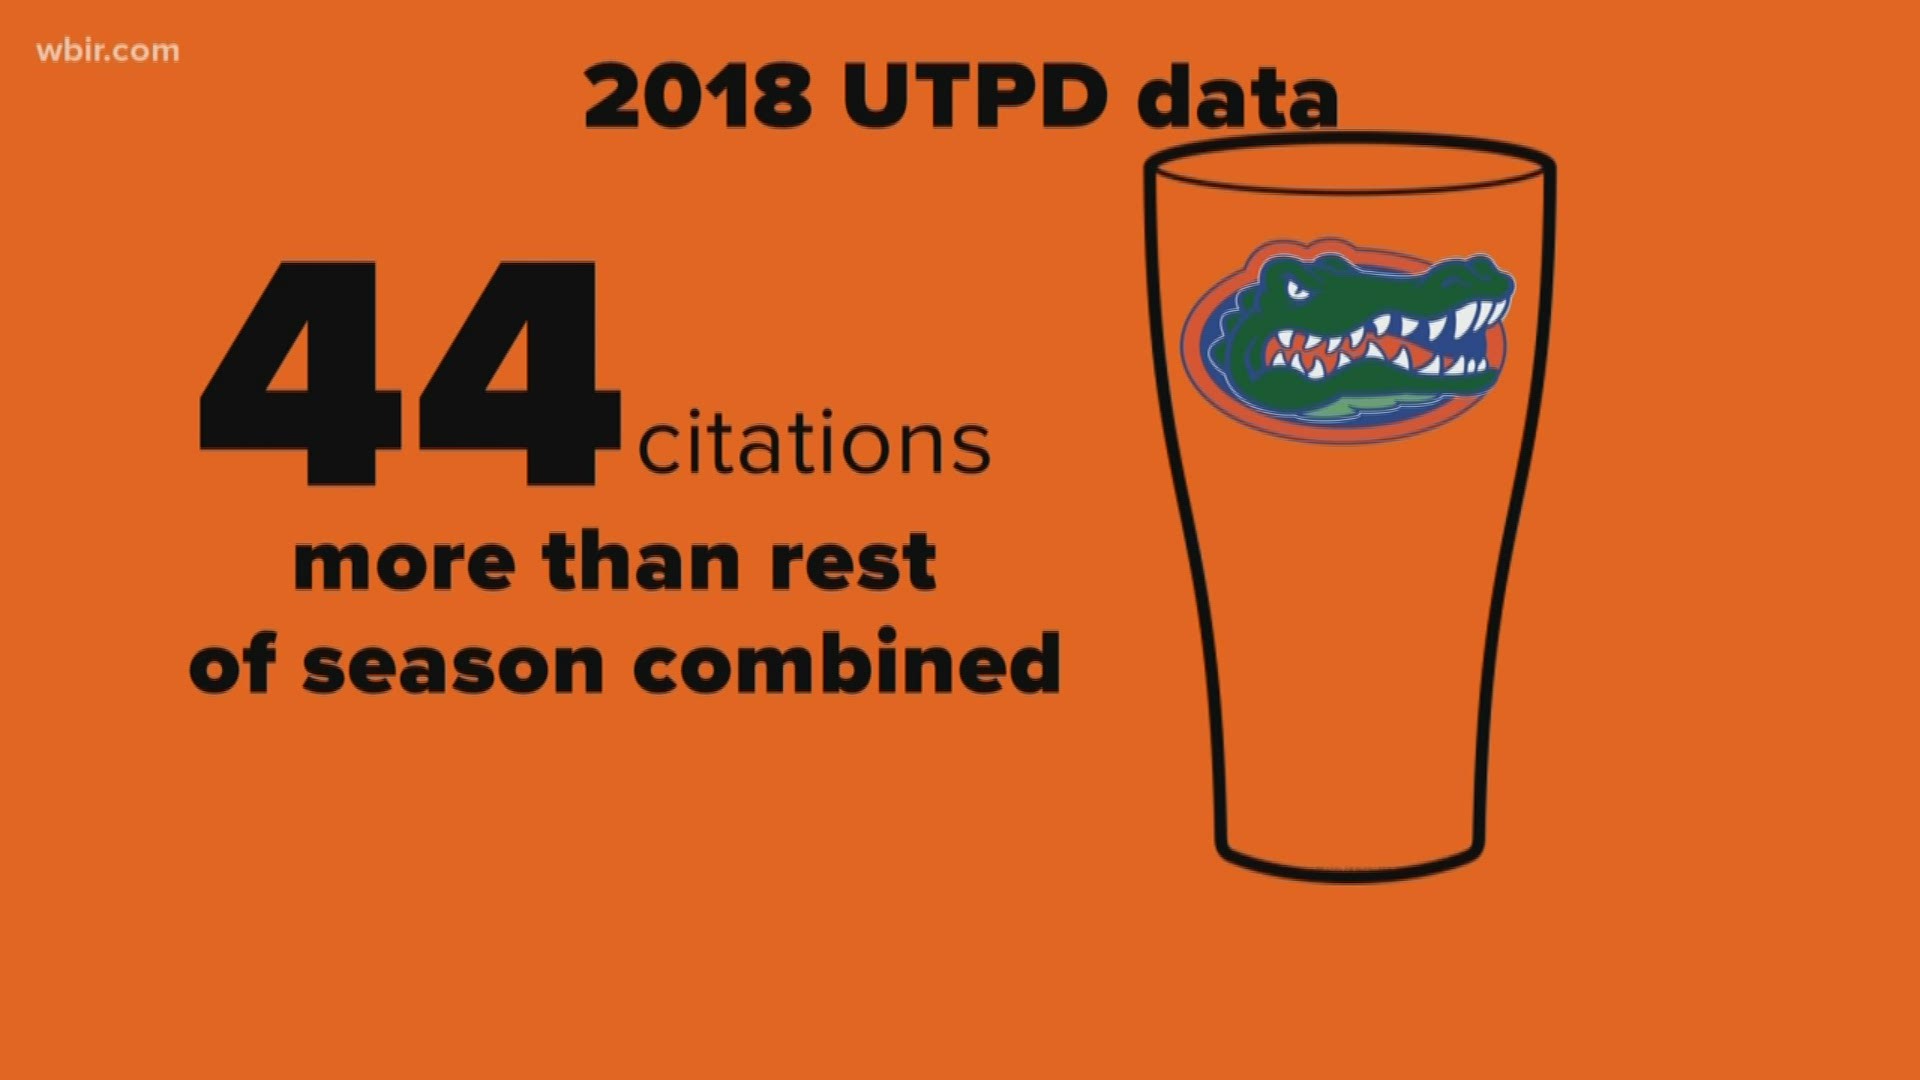 Ahead of beer sales beginning at Neyland Stadium this Saturday, records show games against top SEC rivals have the most alcohol arrests and citations.